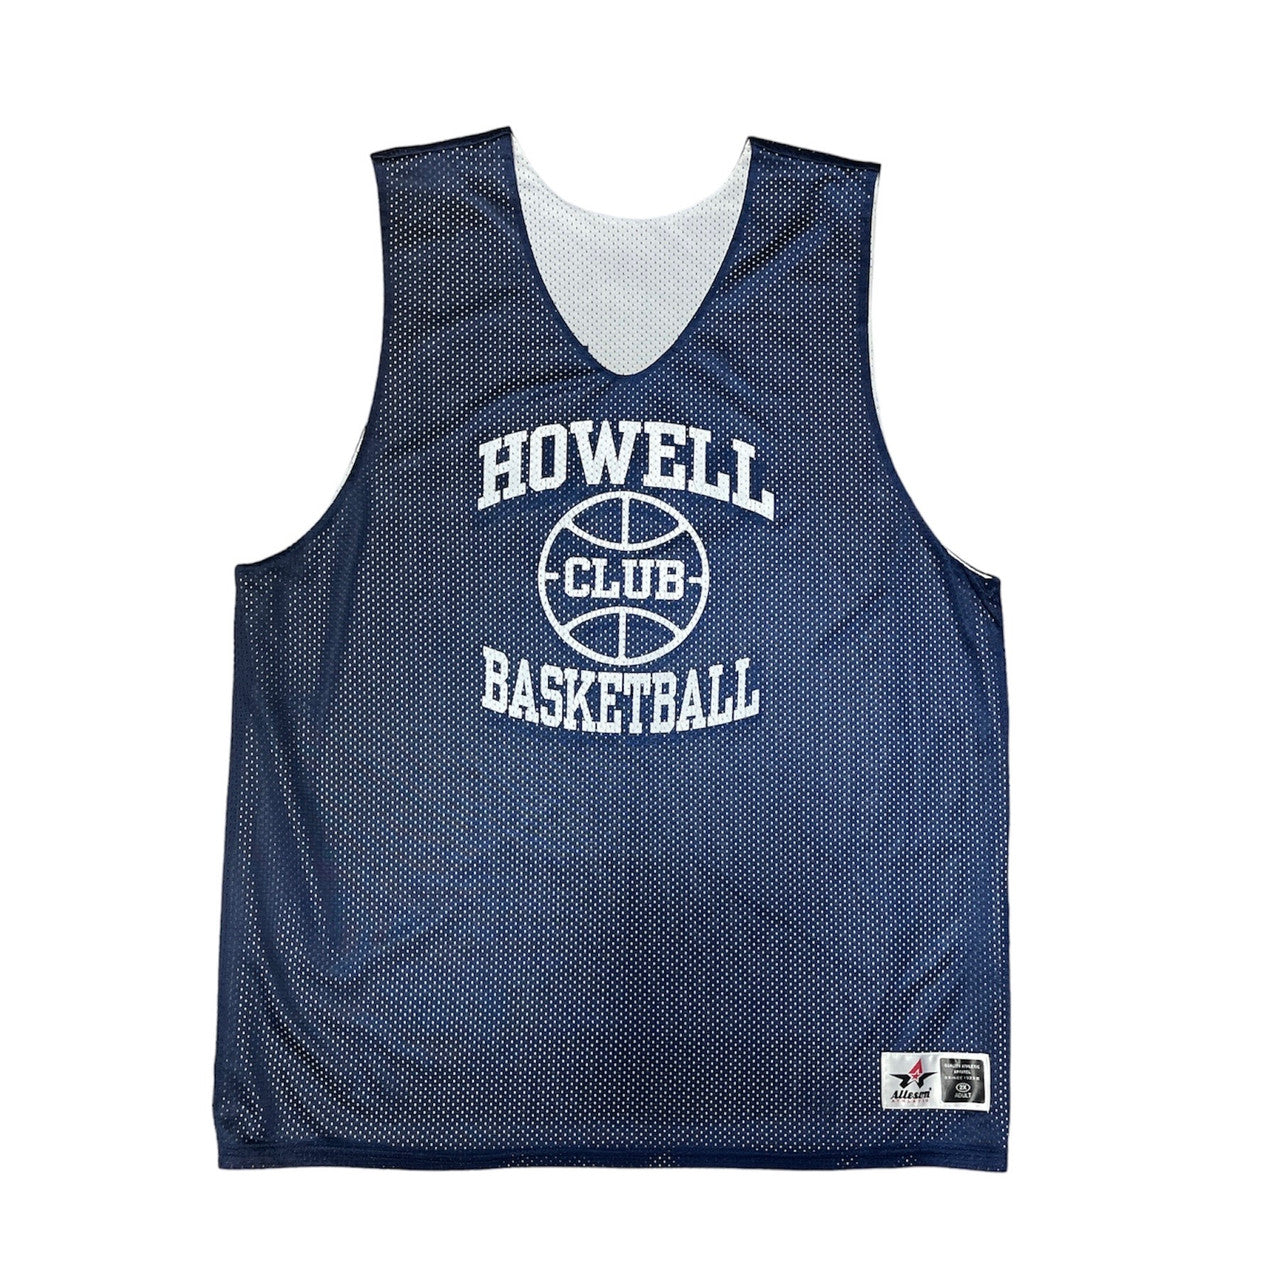 Alleson Athletic Howell Reversible Basketball Jersey